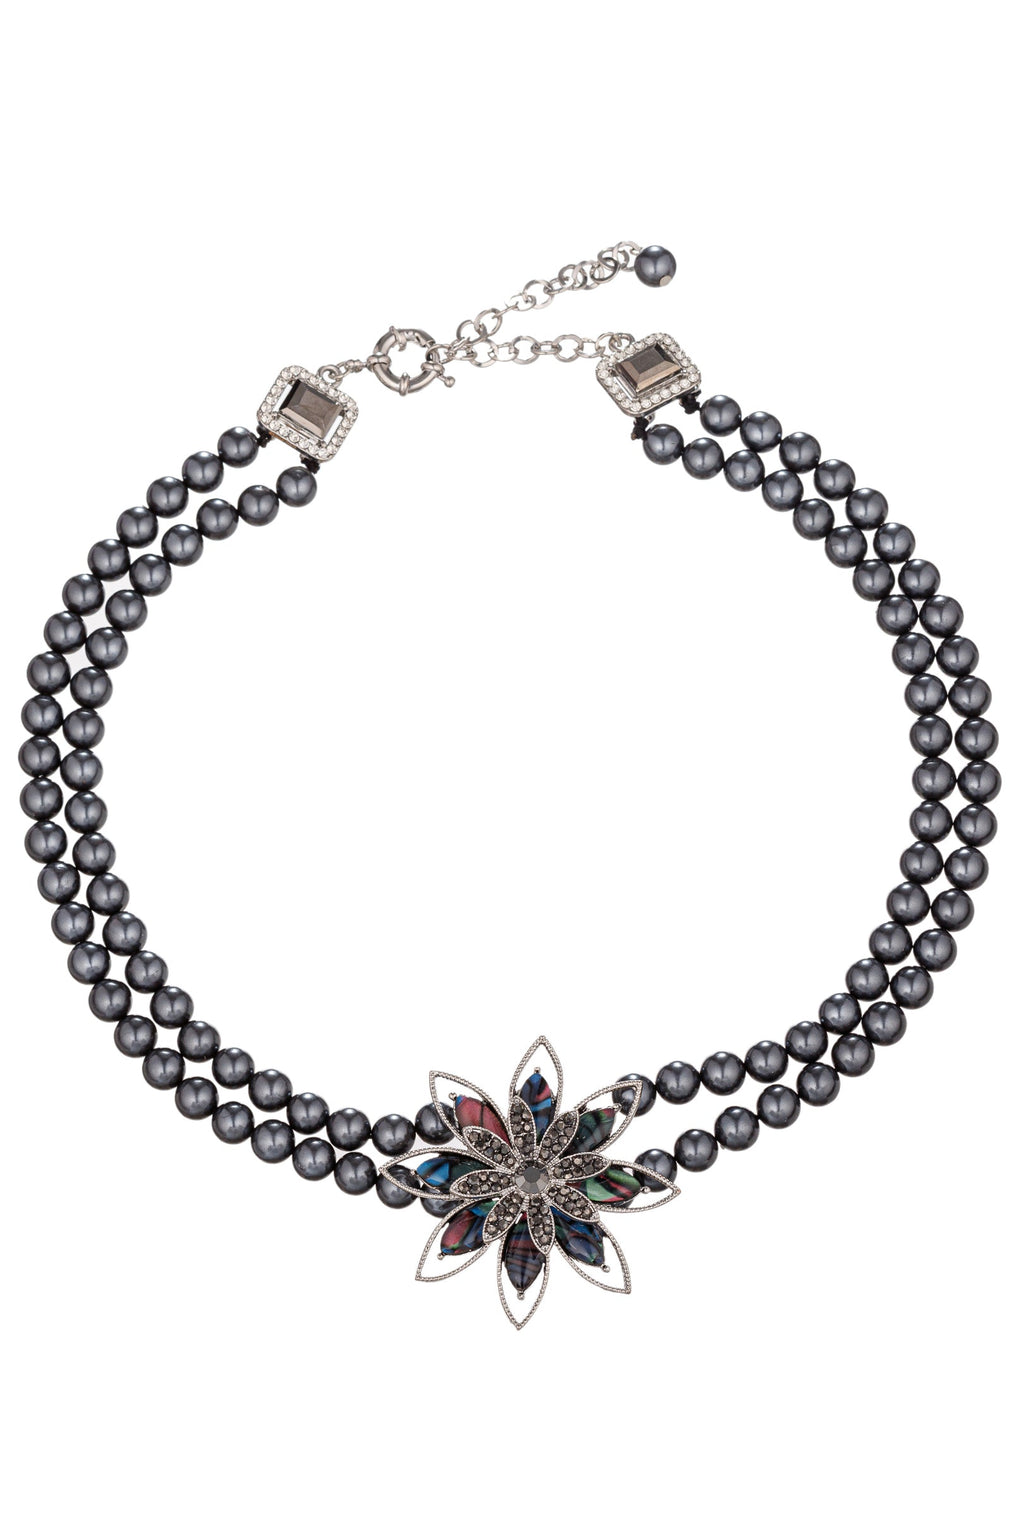 Elevate Your Style with the Alya Beaded Statement Necklace.